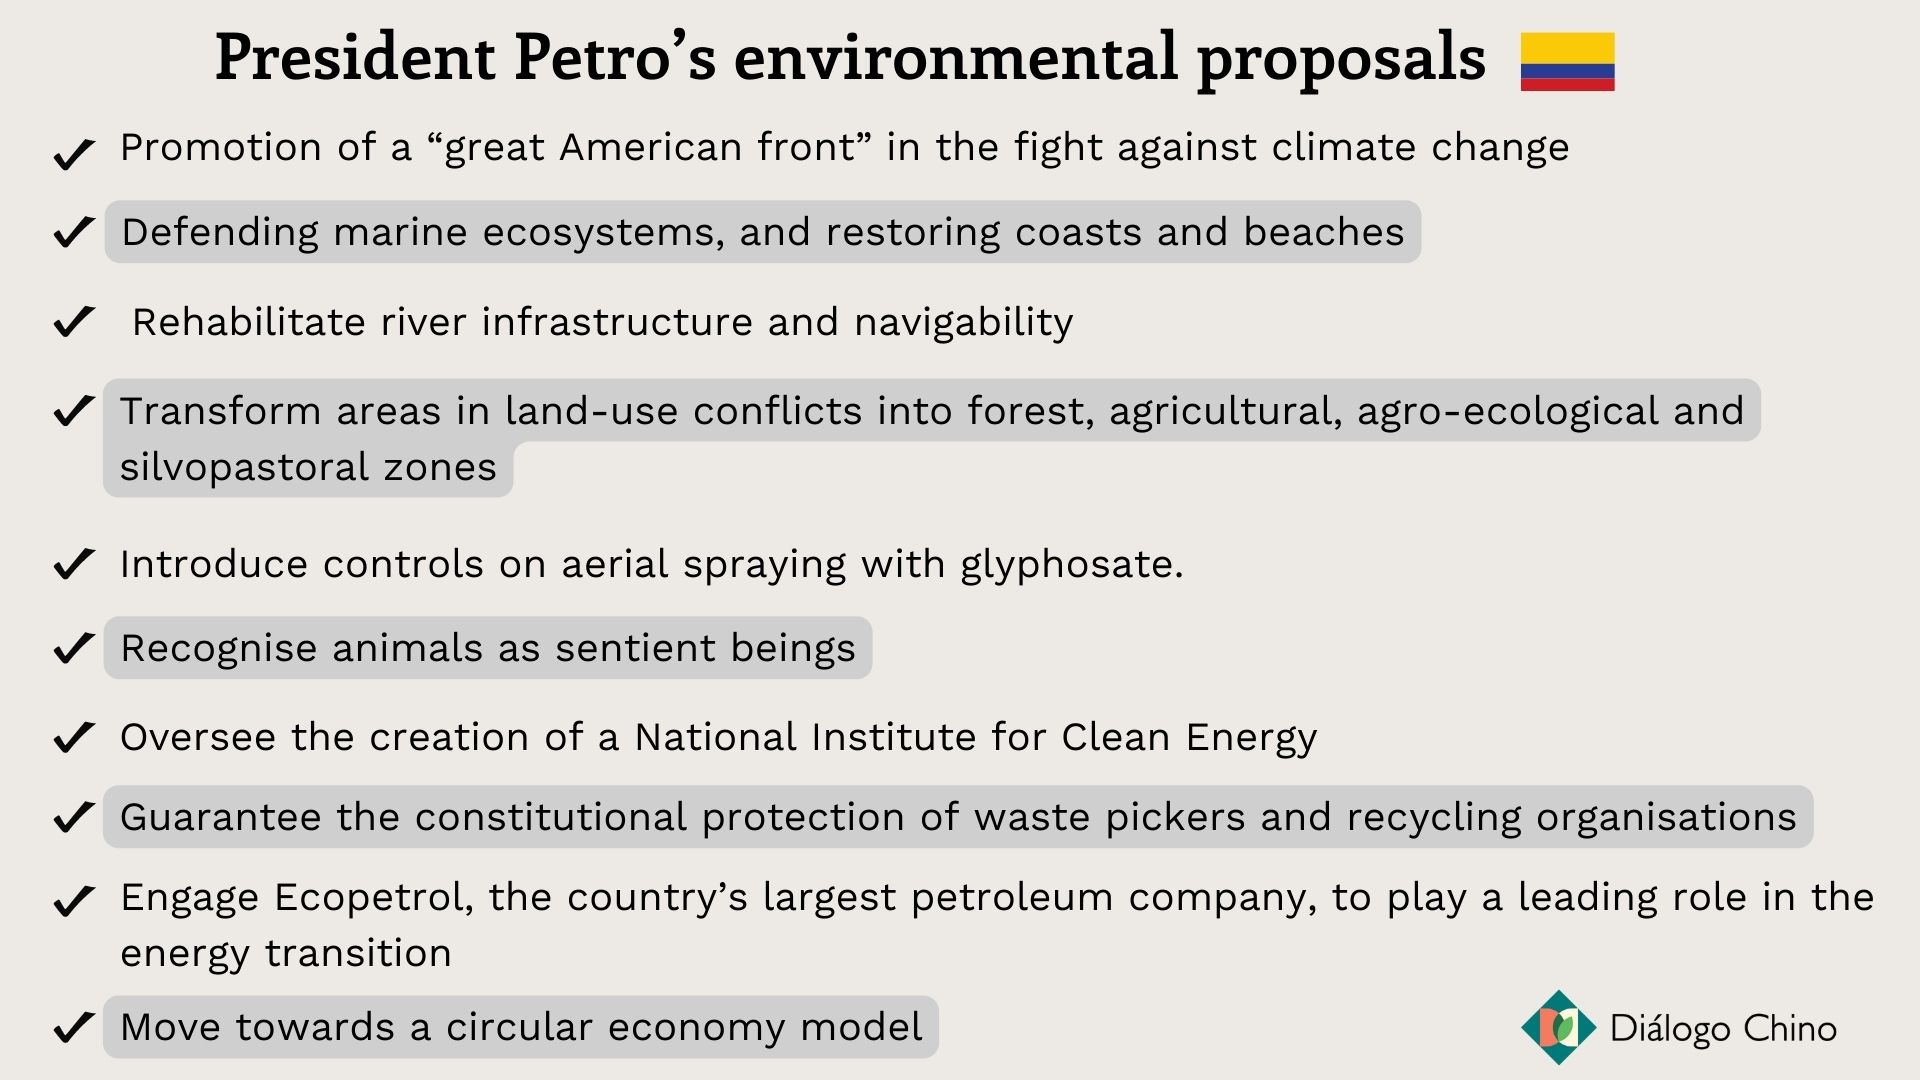 Petro's list of environmental proposals in Colombia